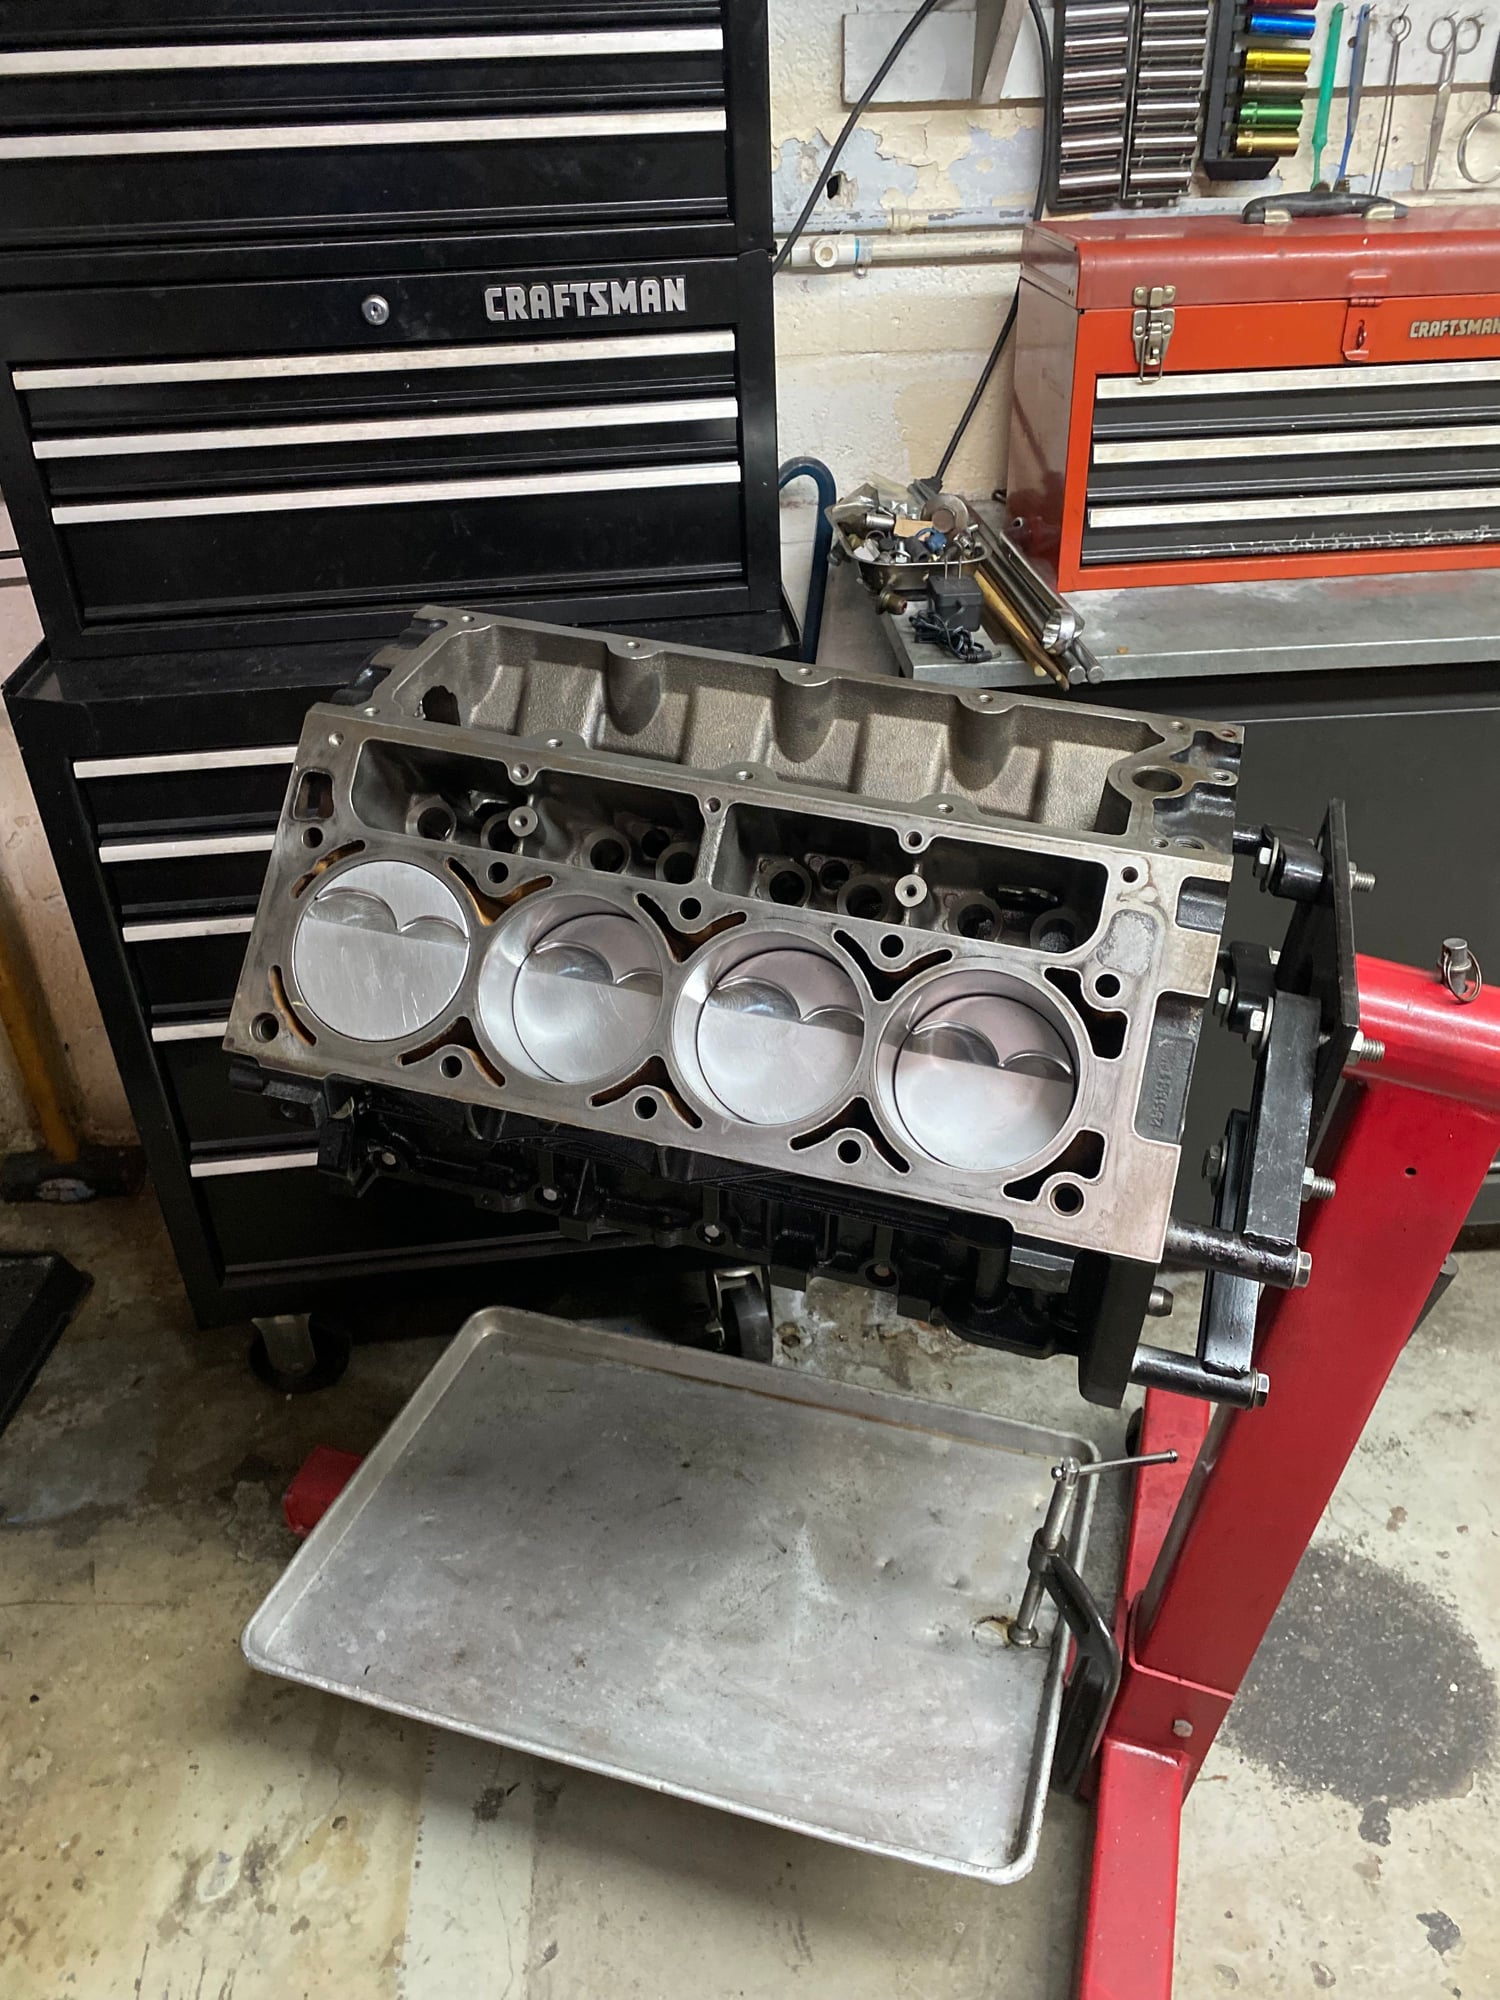 Engine - Complete - LS 6.0L forged iron short block, 370ci, forged rods/pistons, GM 24x crank - New - All Years  All Models - Ft. Lauderdale, FL 33334, United States